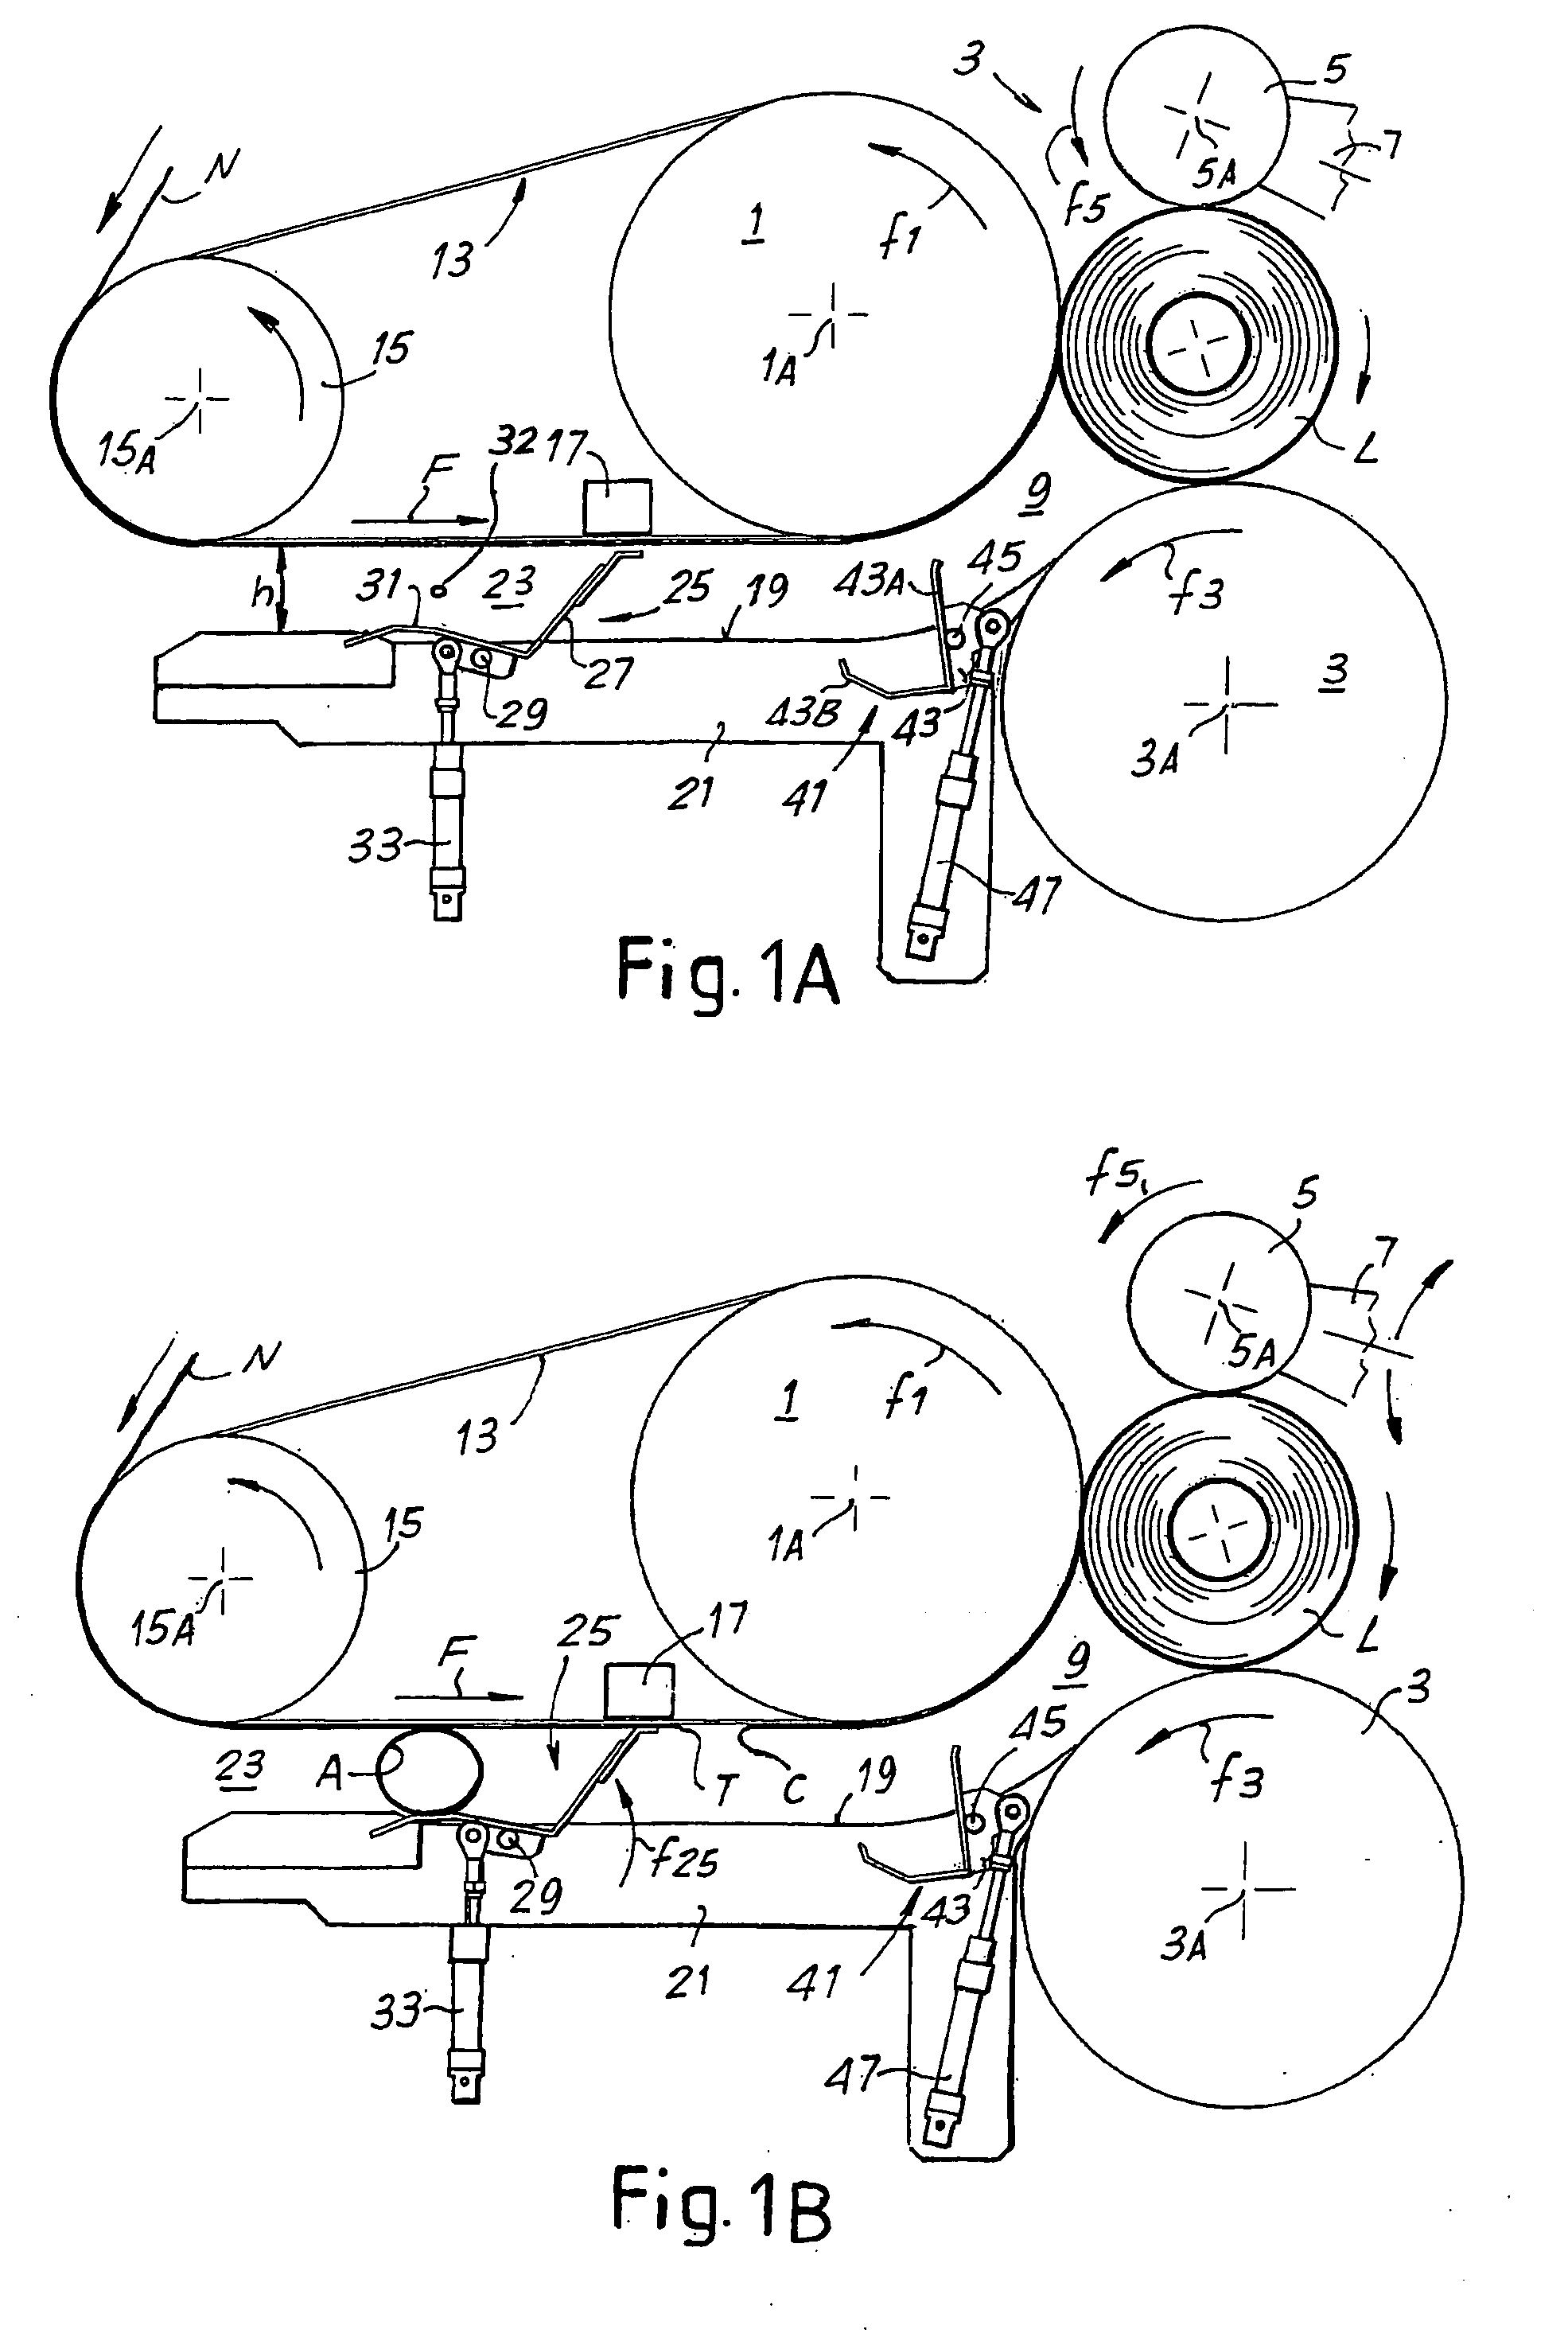 Method and Machine for Forming Logs of Web Material, with a Mechanical Device for Forming the Initial Turn of the Logs